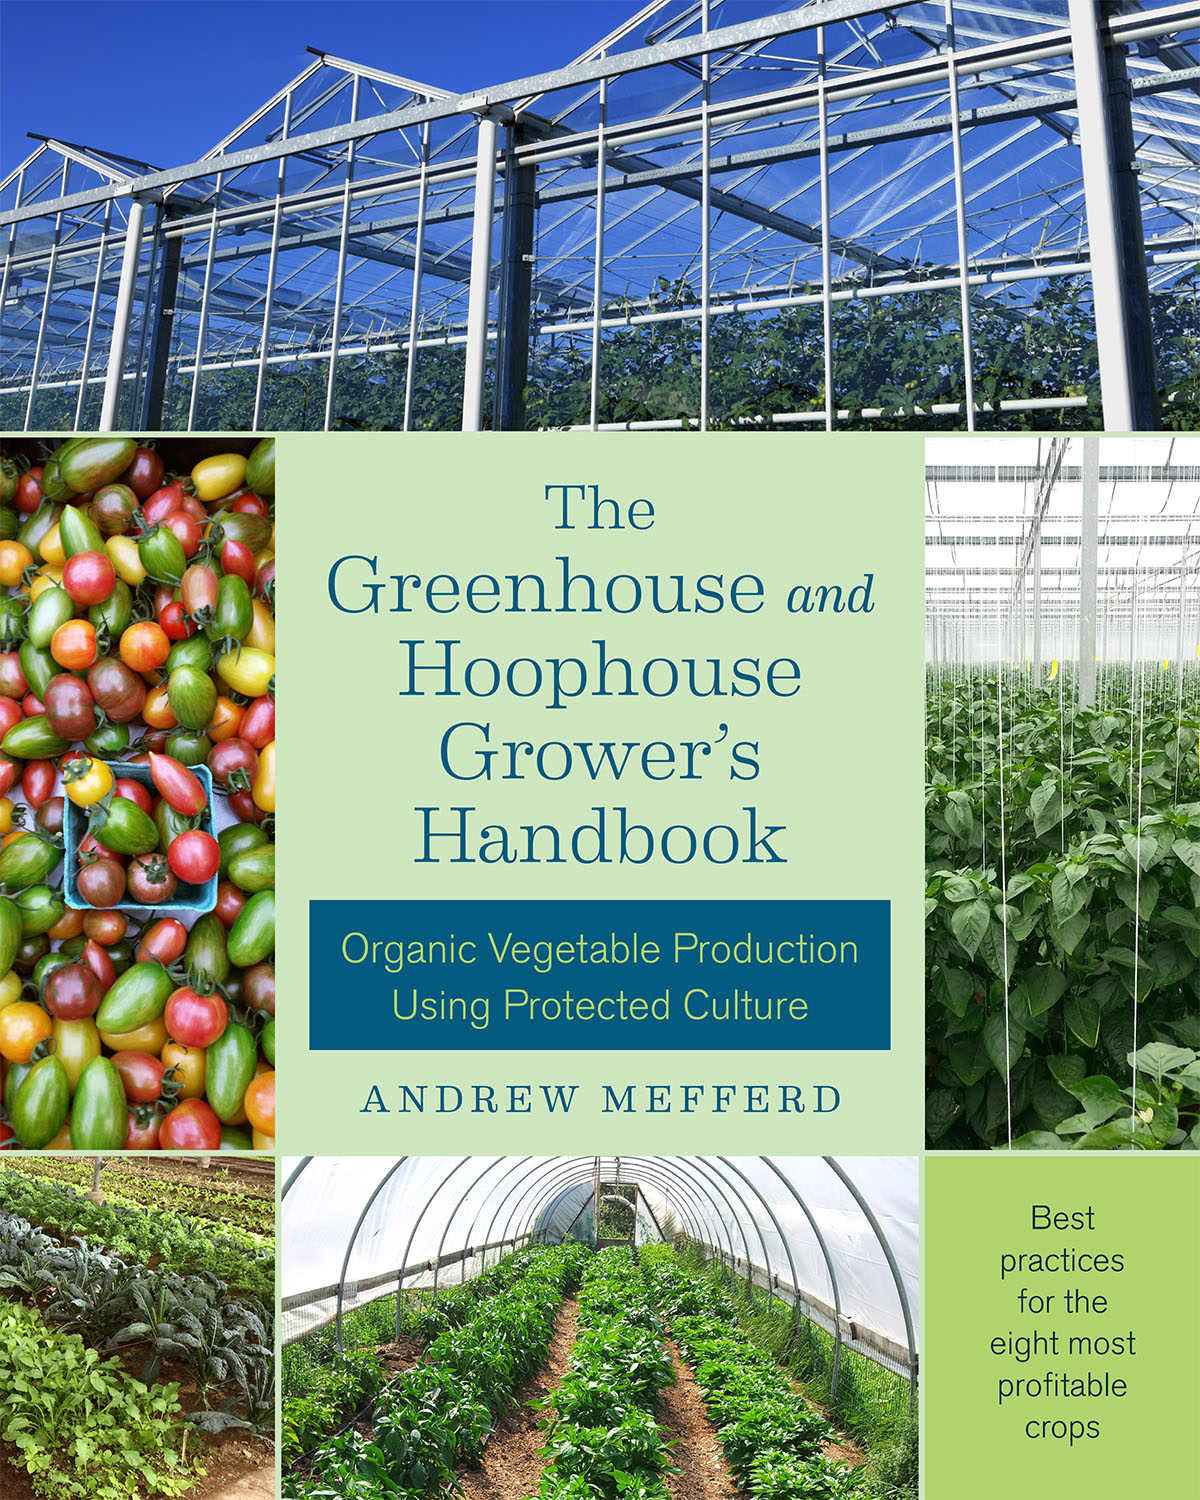 The Greenhouse and Hoophouse Grower’s Handbook